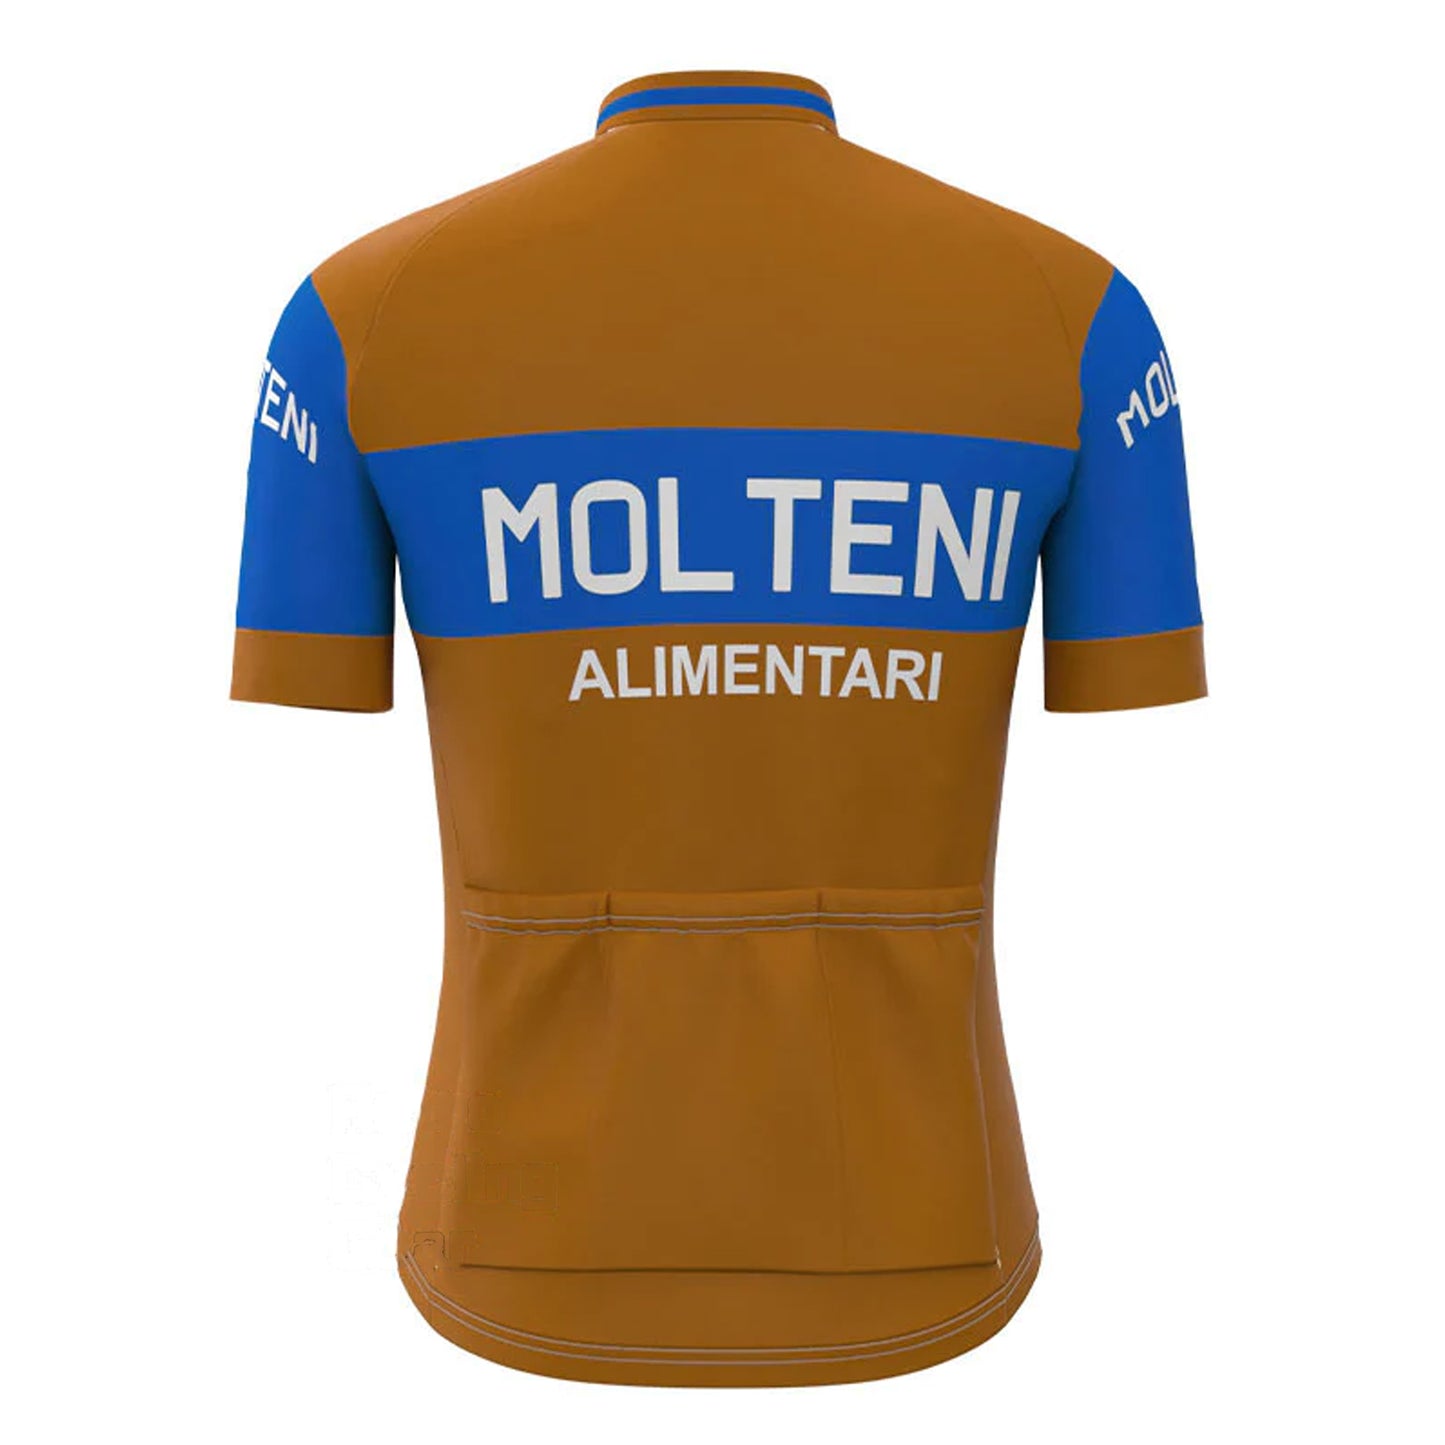 Molteni Brown Blue Vintage Short Sleeve Cycling Jersey Top